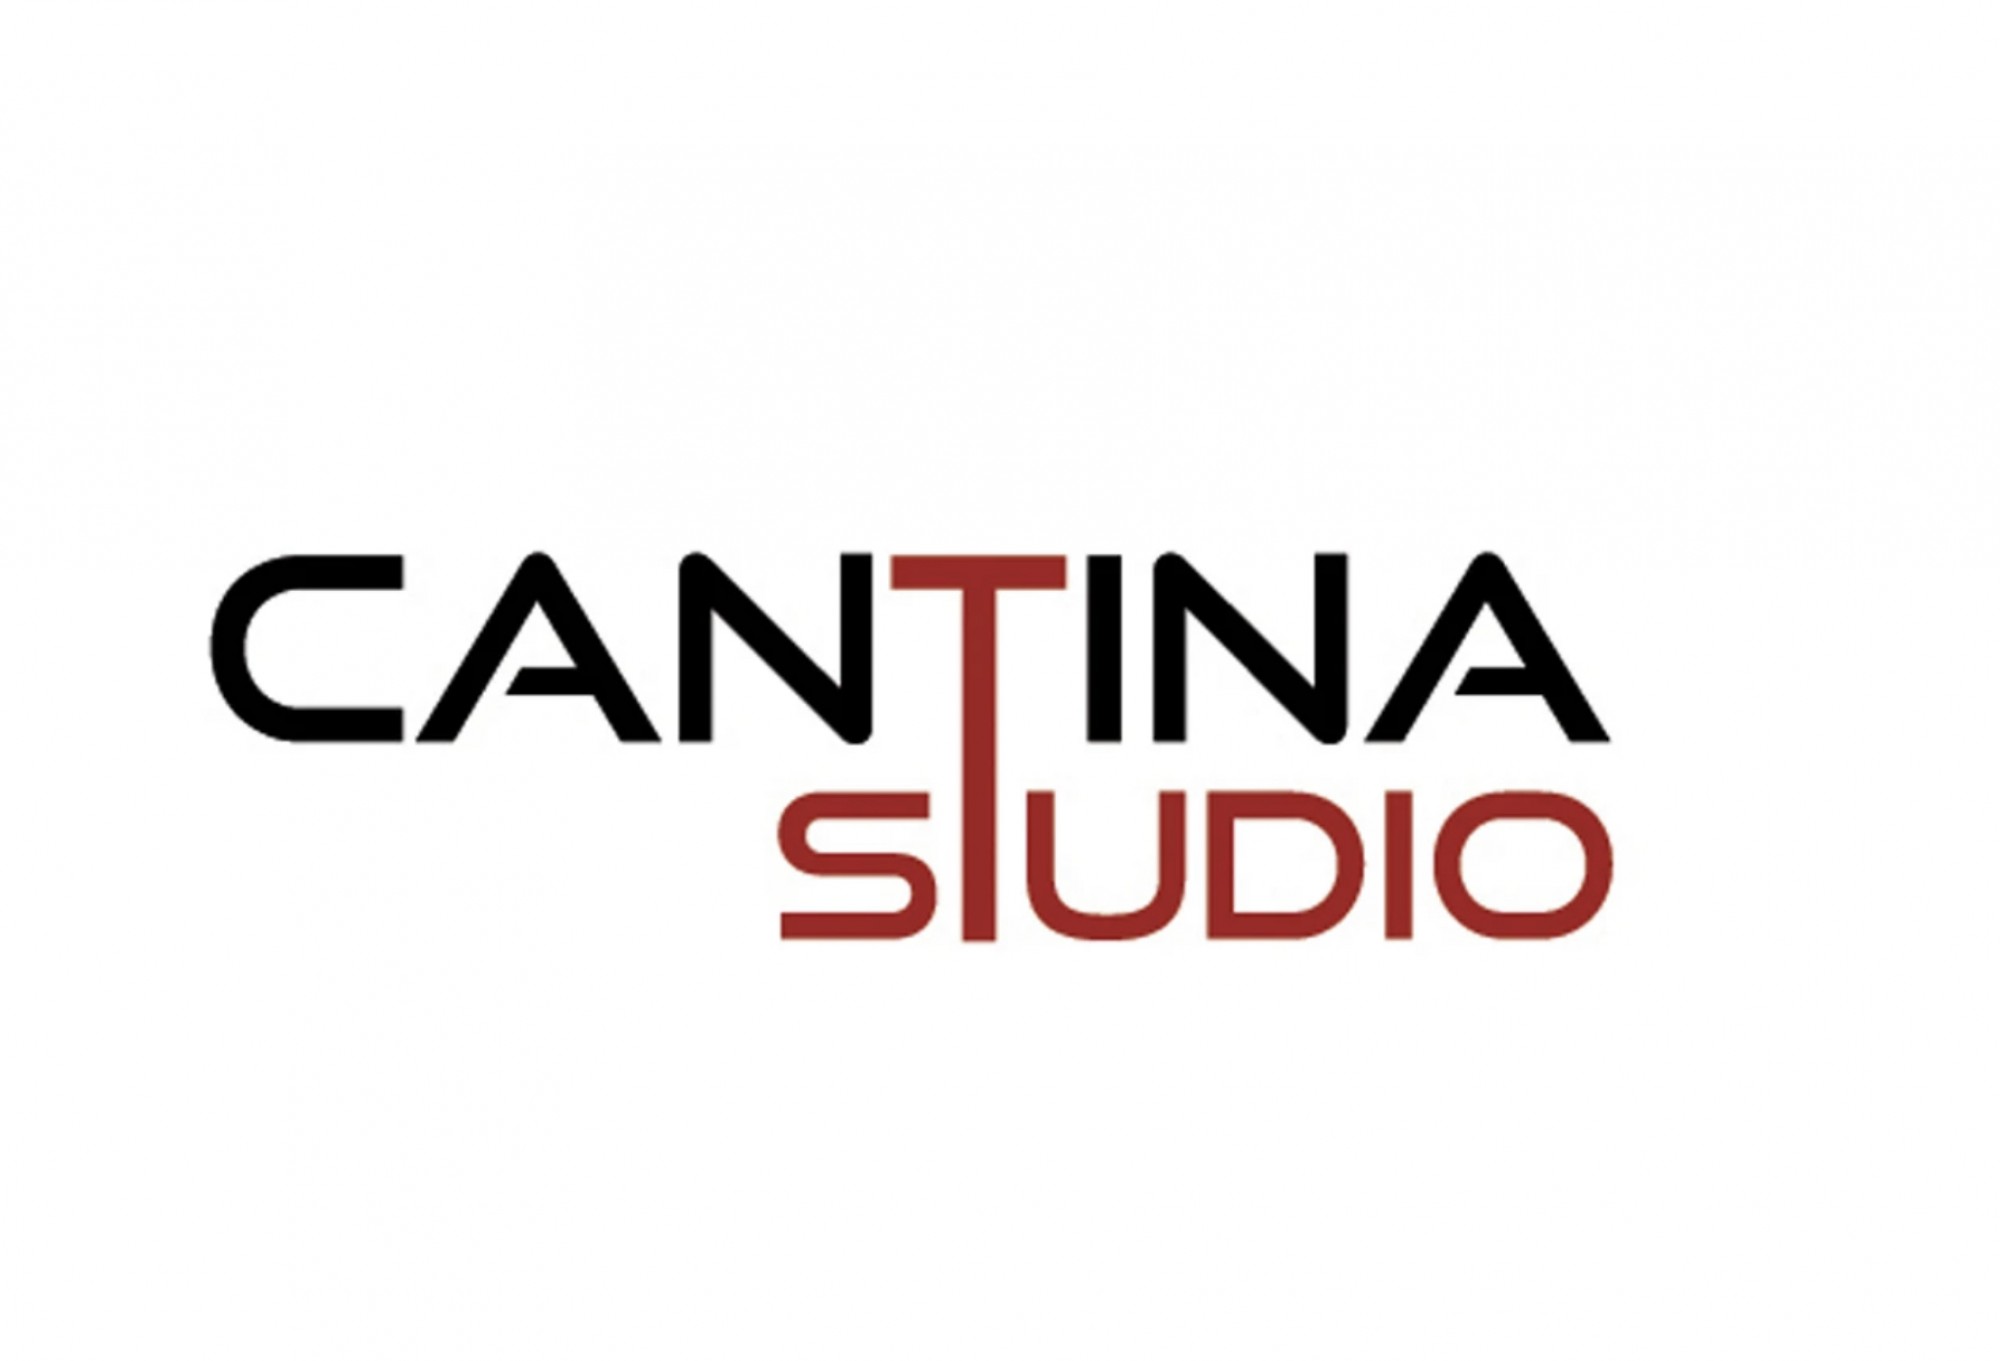 Cantina Studio and Rapsodies will produce "The First Eternal" together.